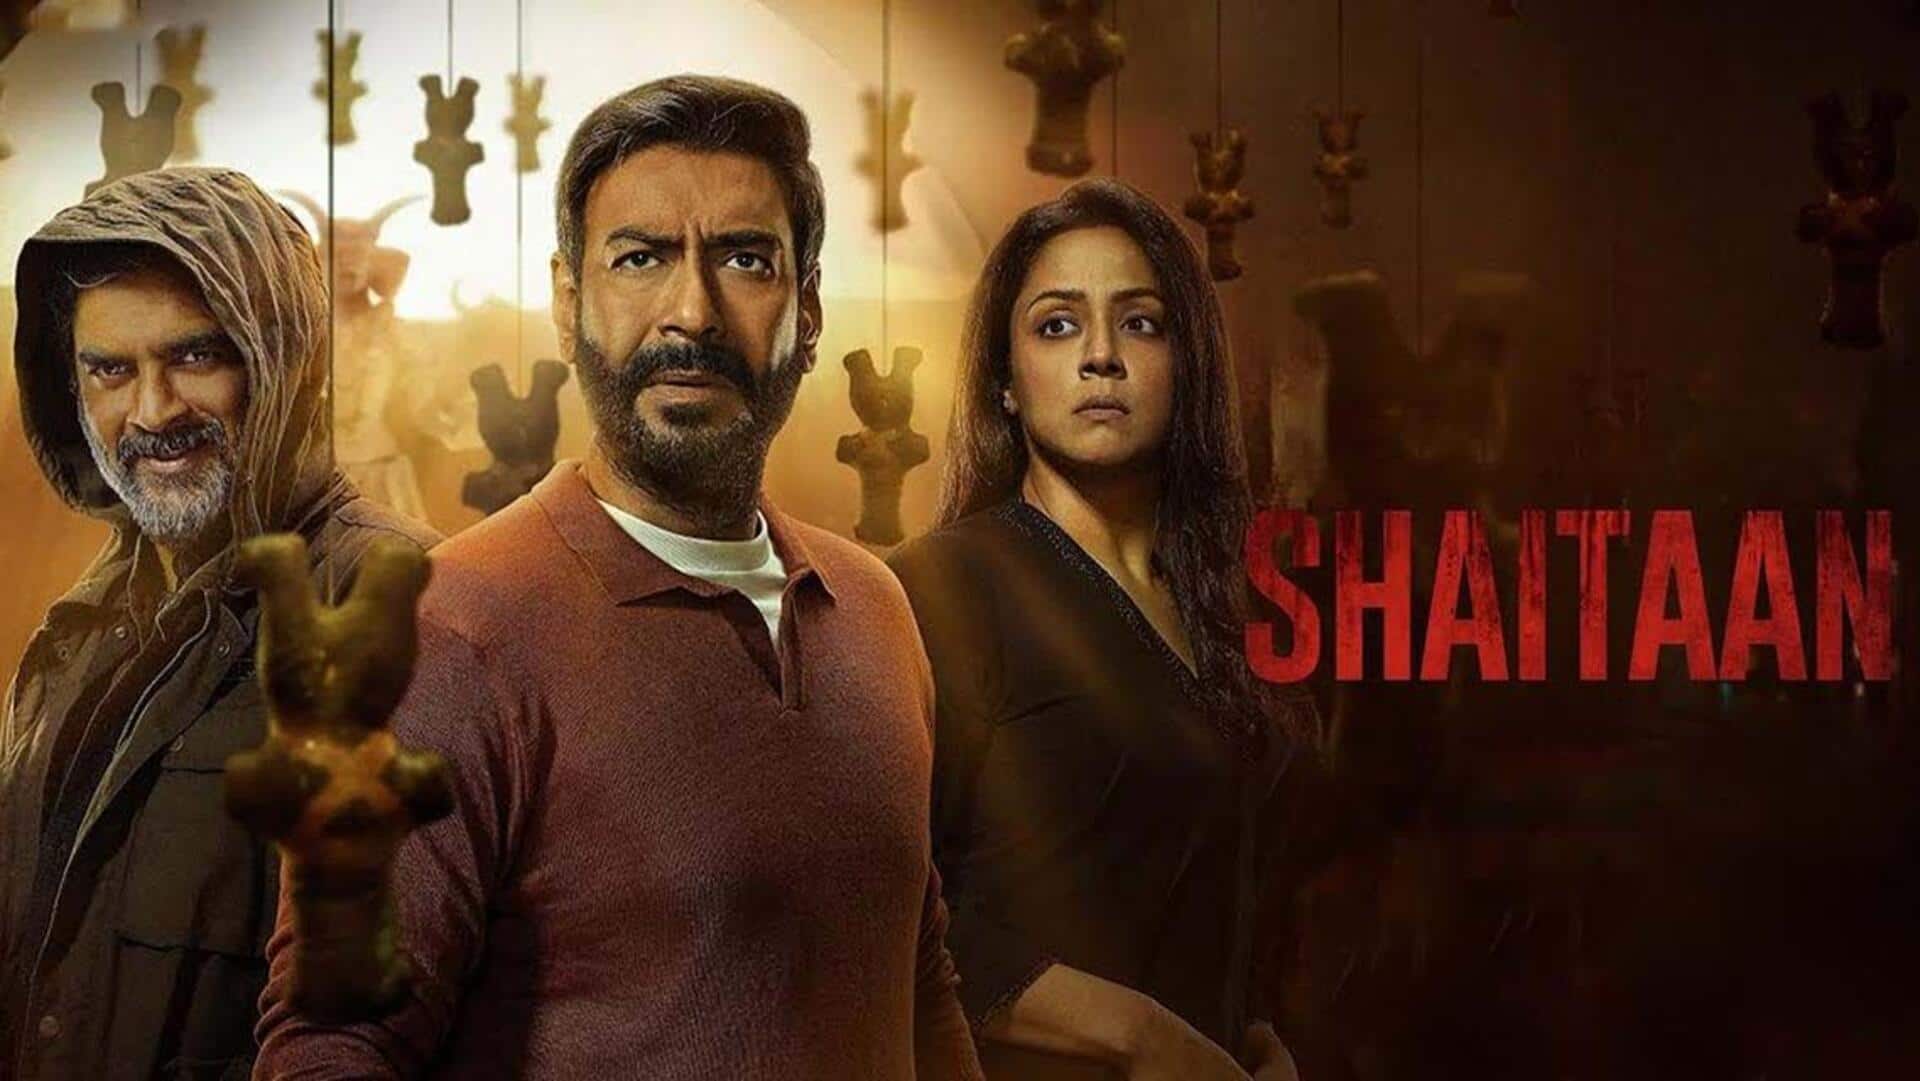 Box office collection: 'Shaitaan' aims to shift gears on weekend